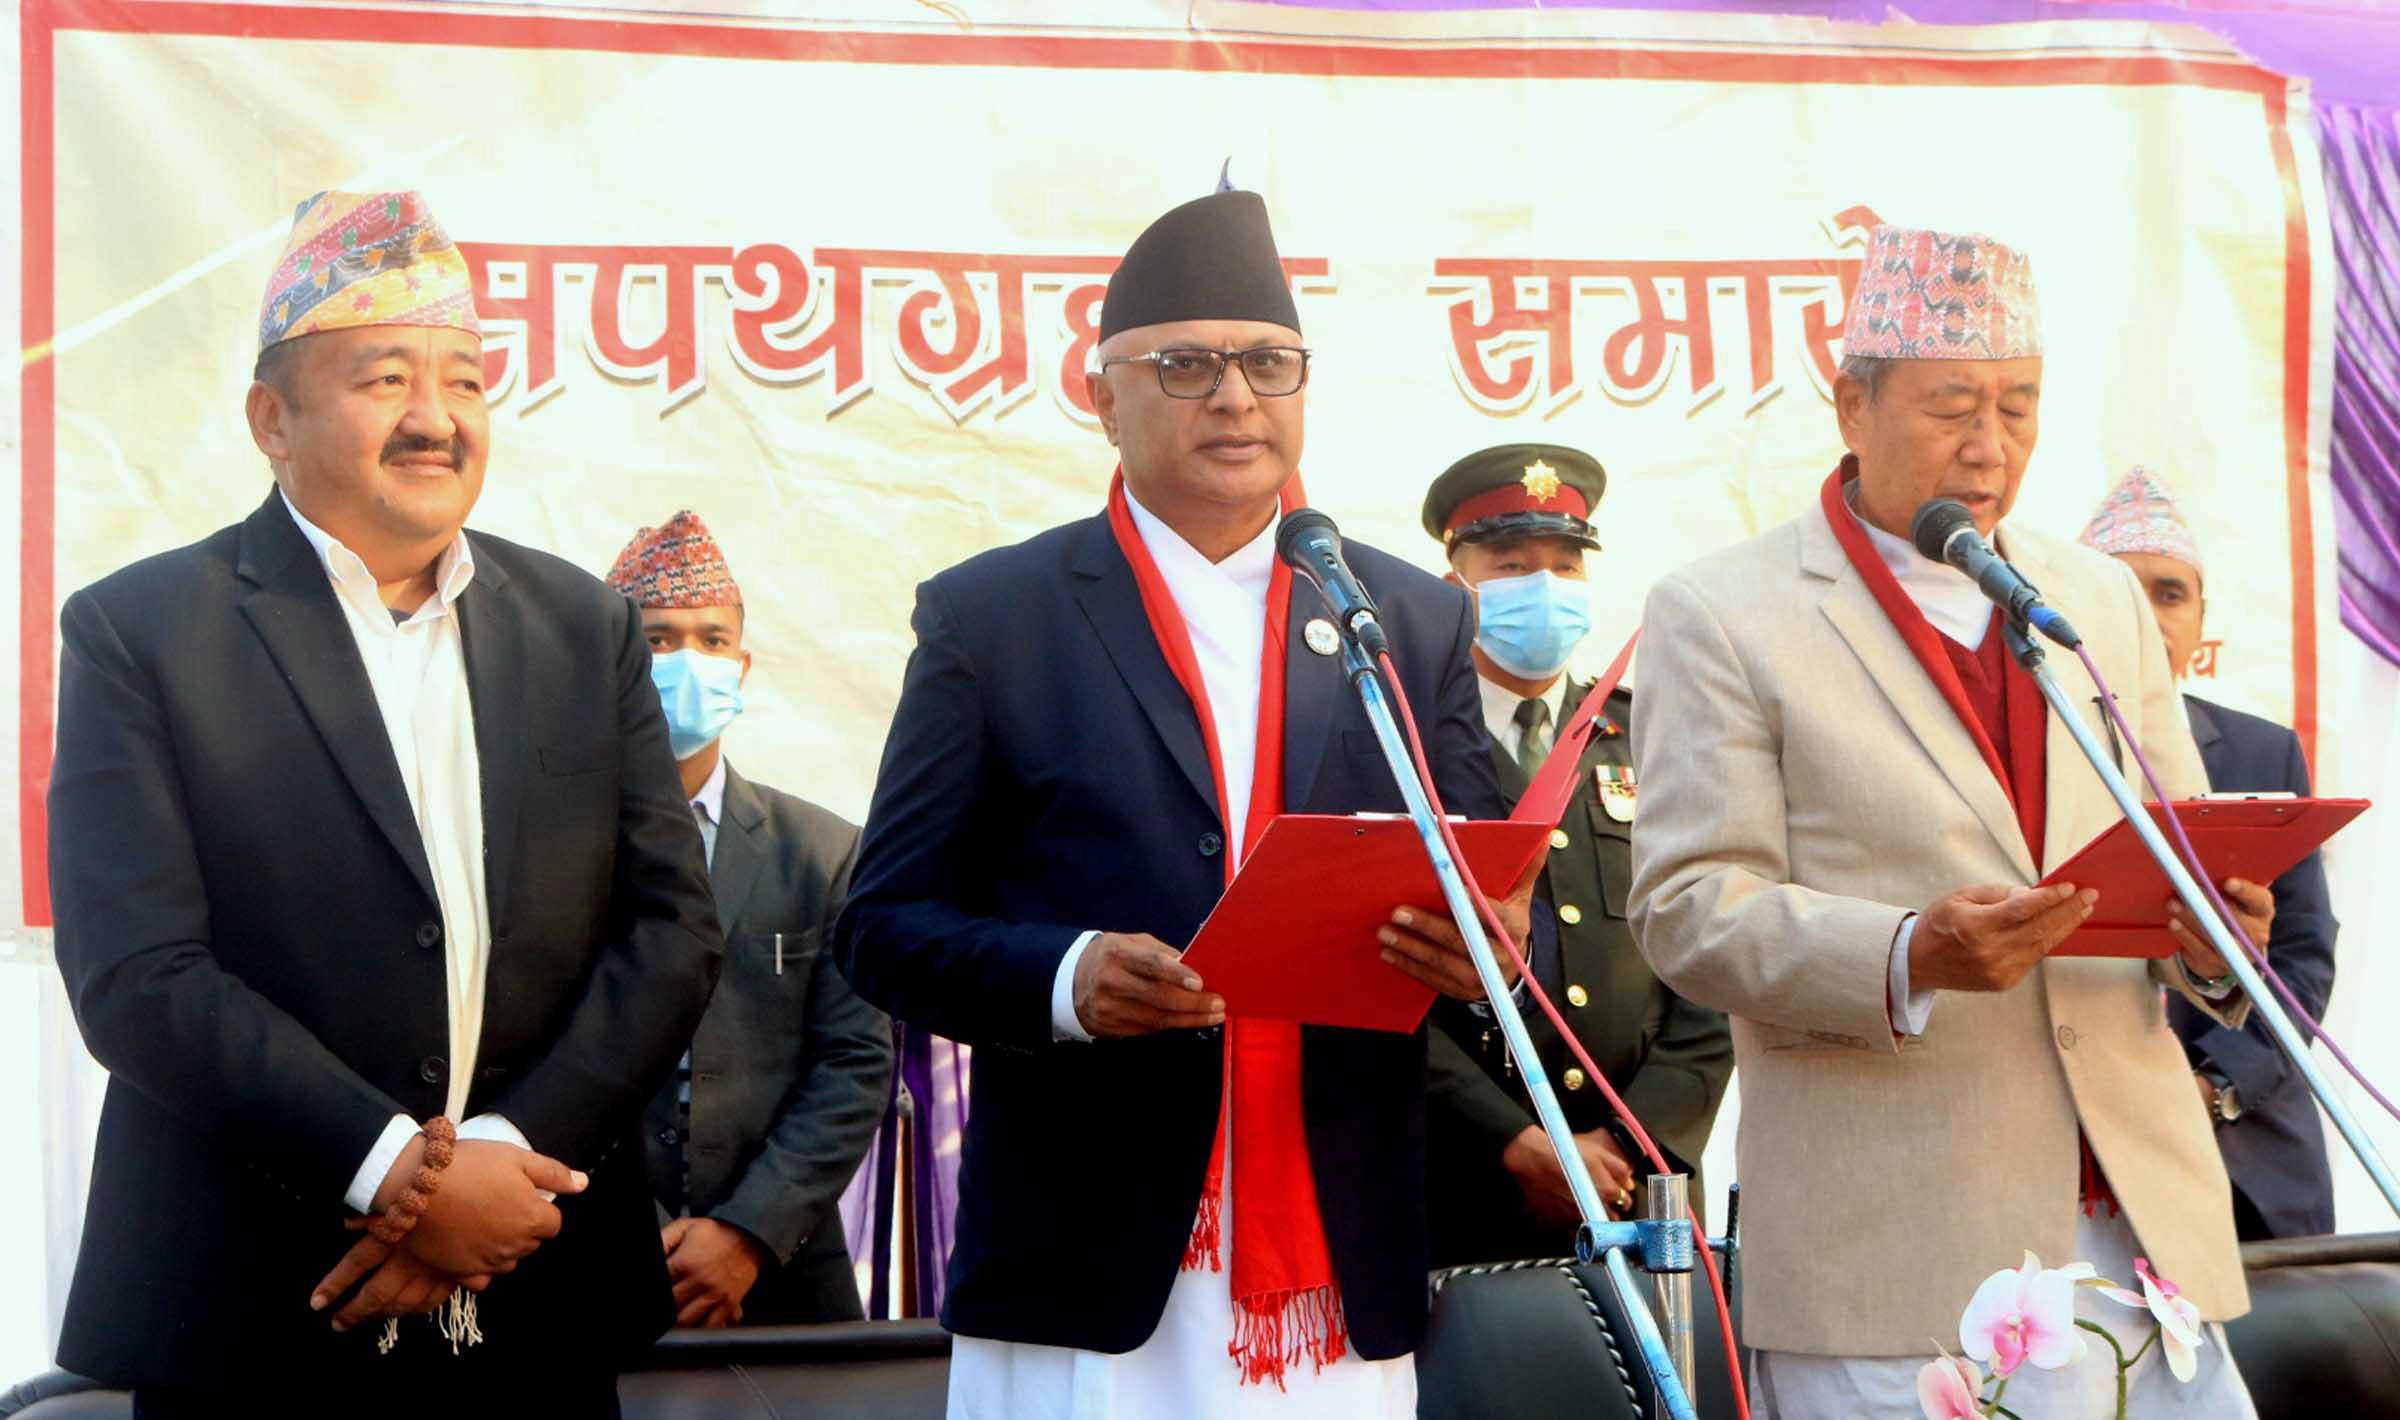 Province 1 Chief Minister Karki takes oath of office